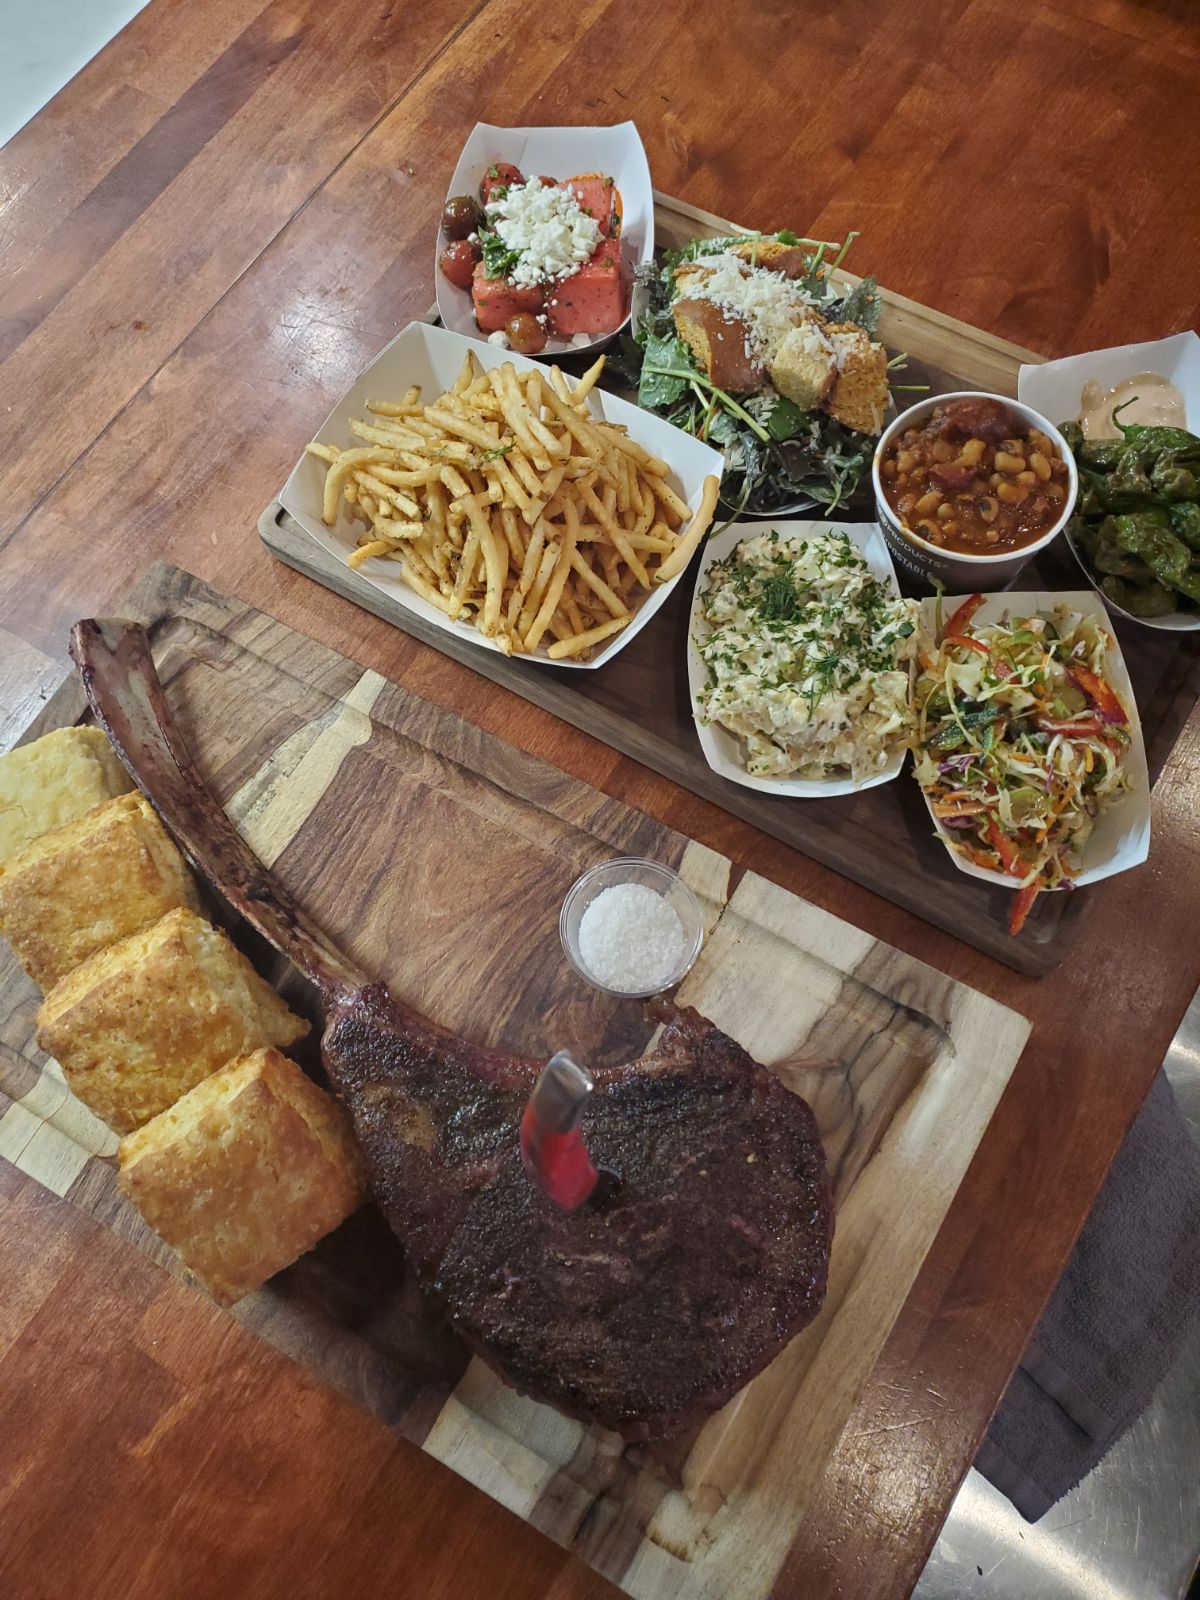 A tomahawk steak with several barbecue-style sides and four biscuits.